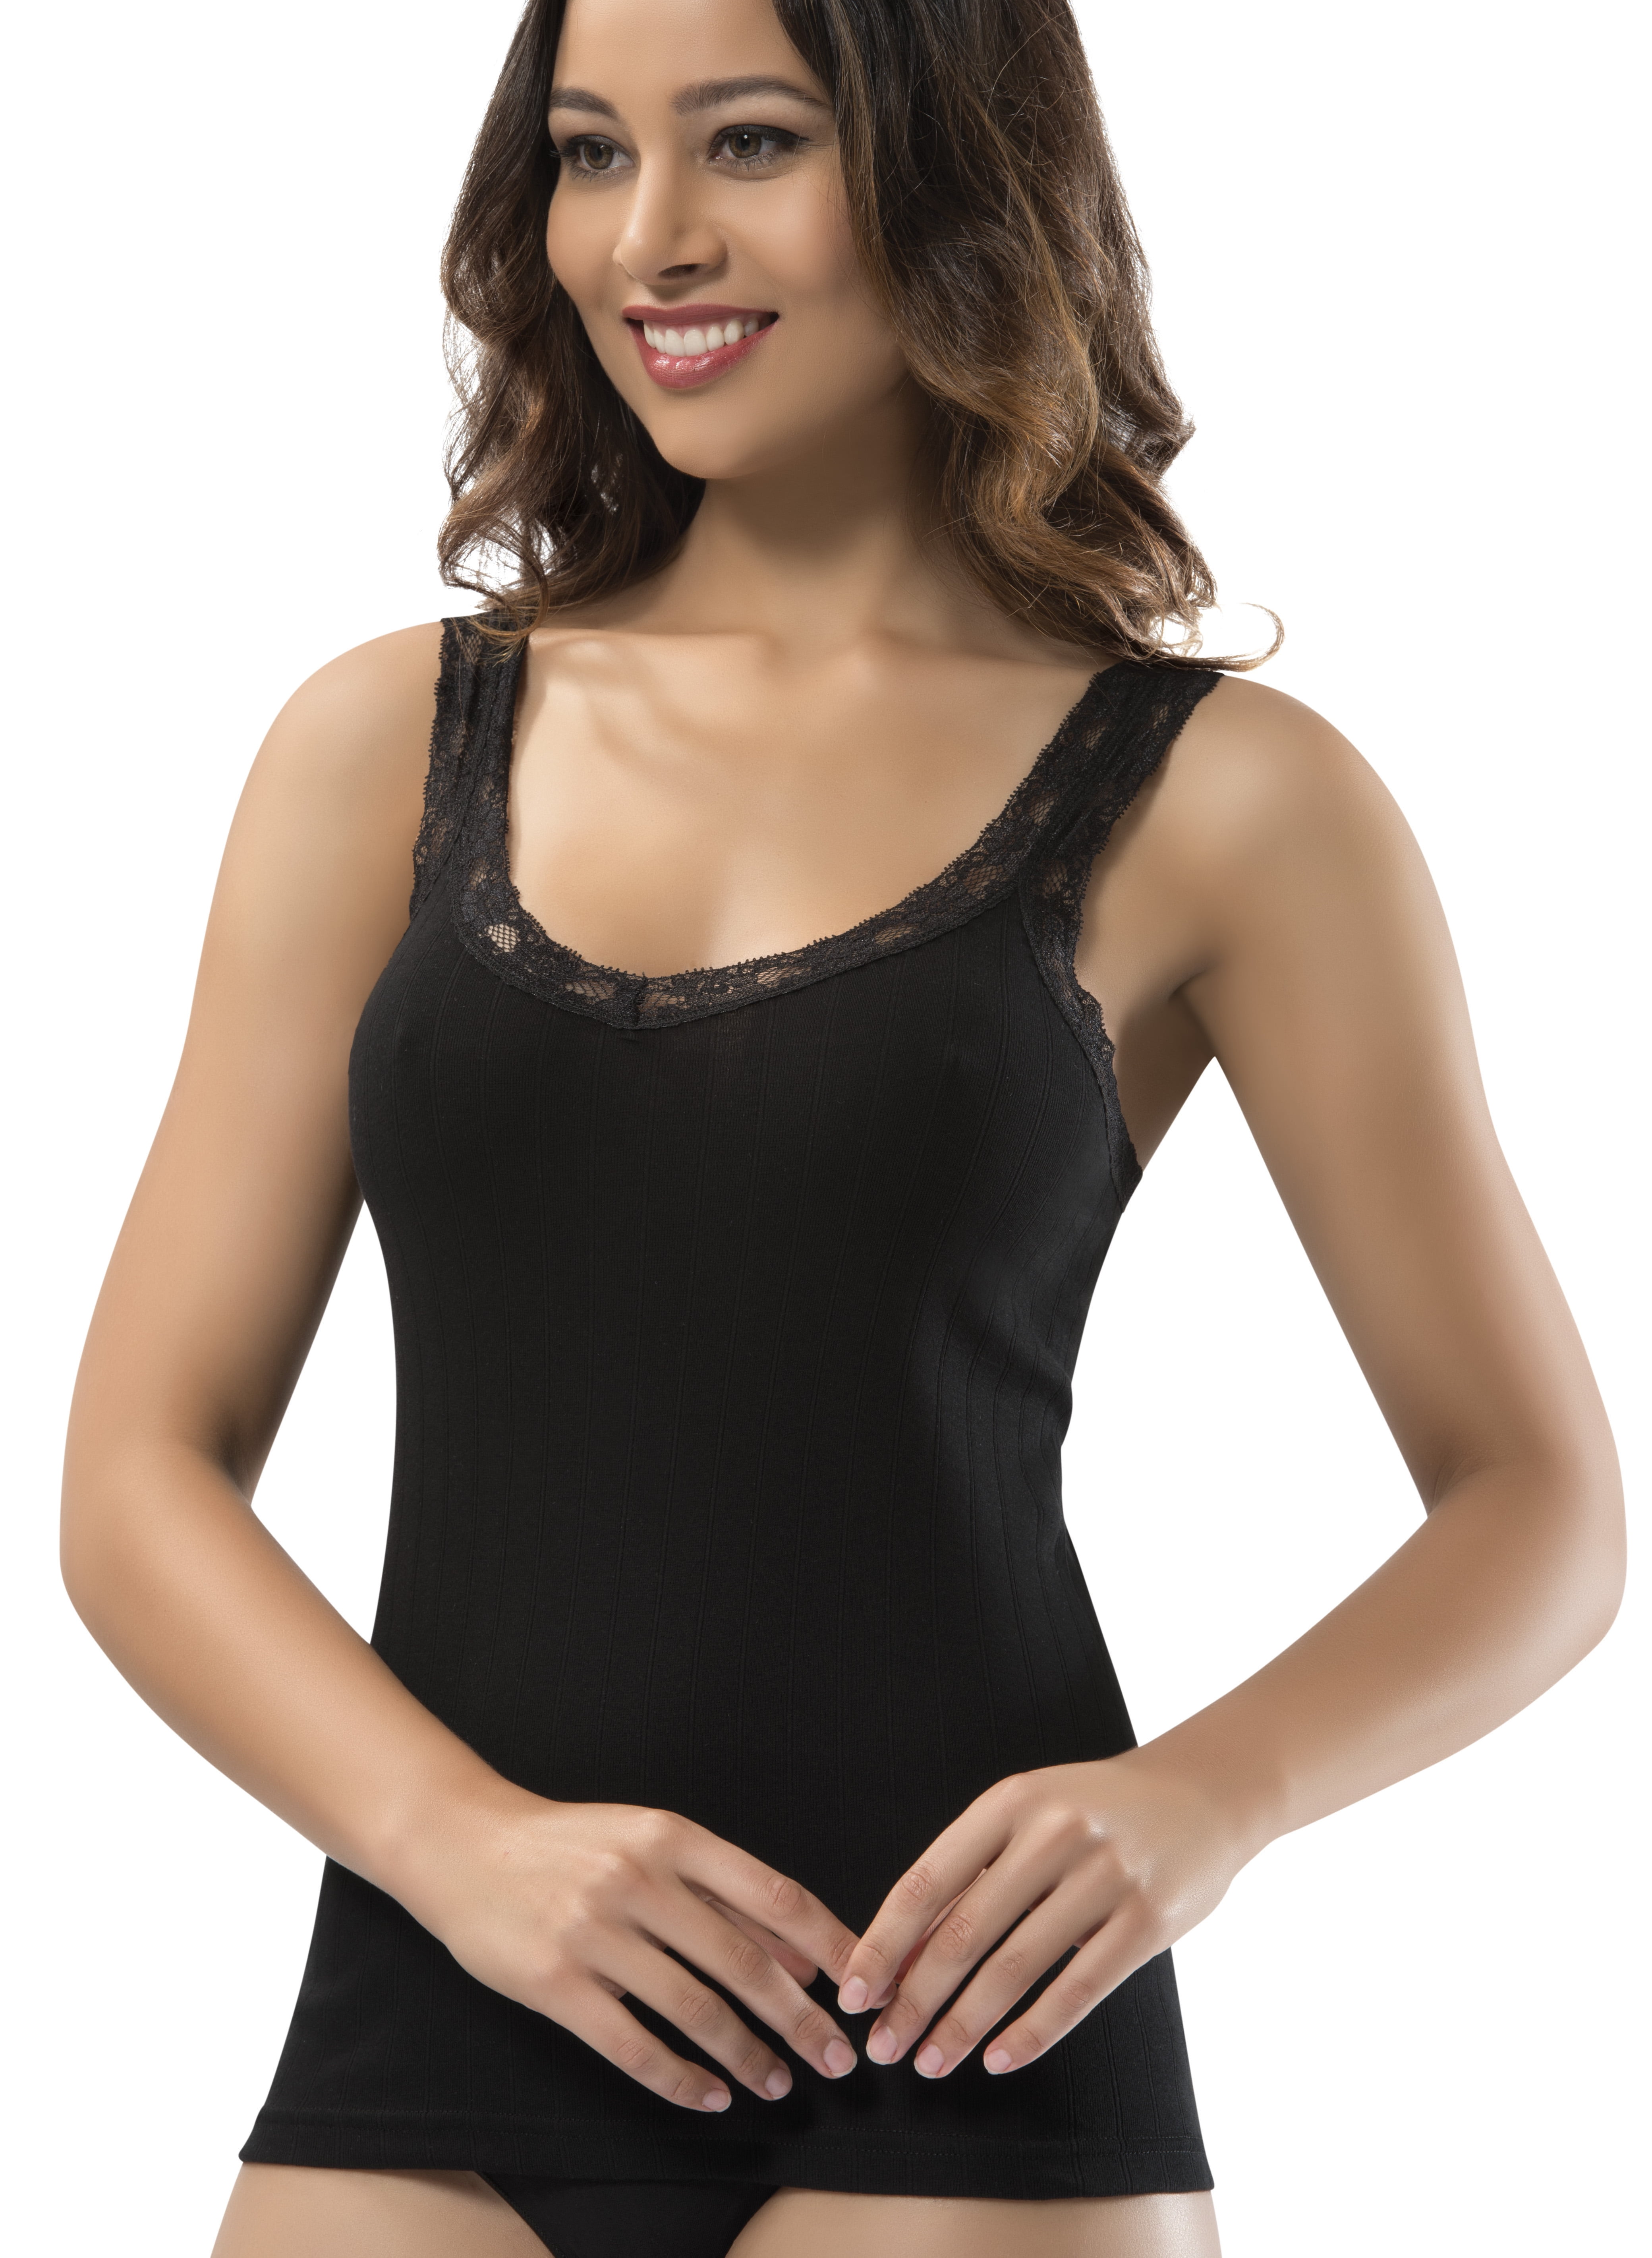 Camisole for Women, 100% Cotton, Airy Soft Comfy Lace Cami Tank Tops  Undershirt (Black/Lace Strap, XXX-Large)